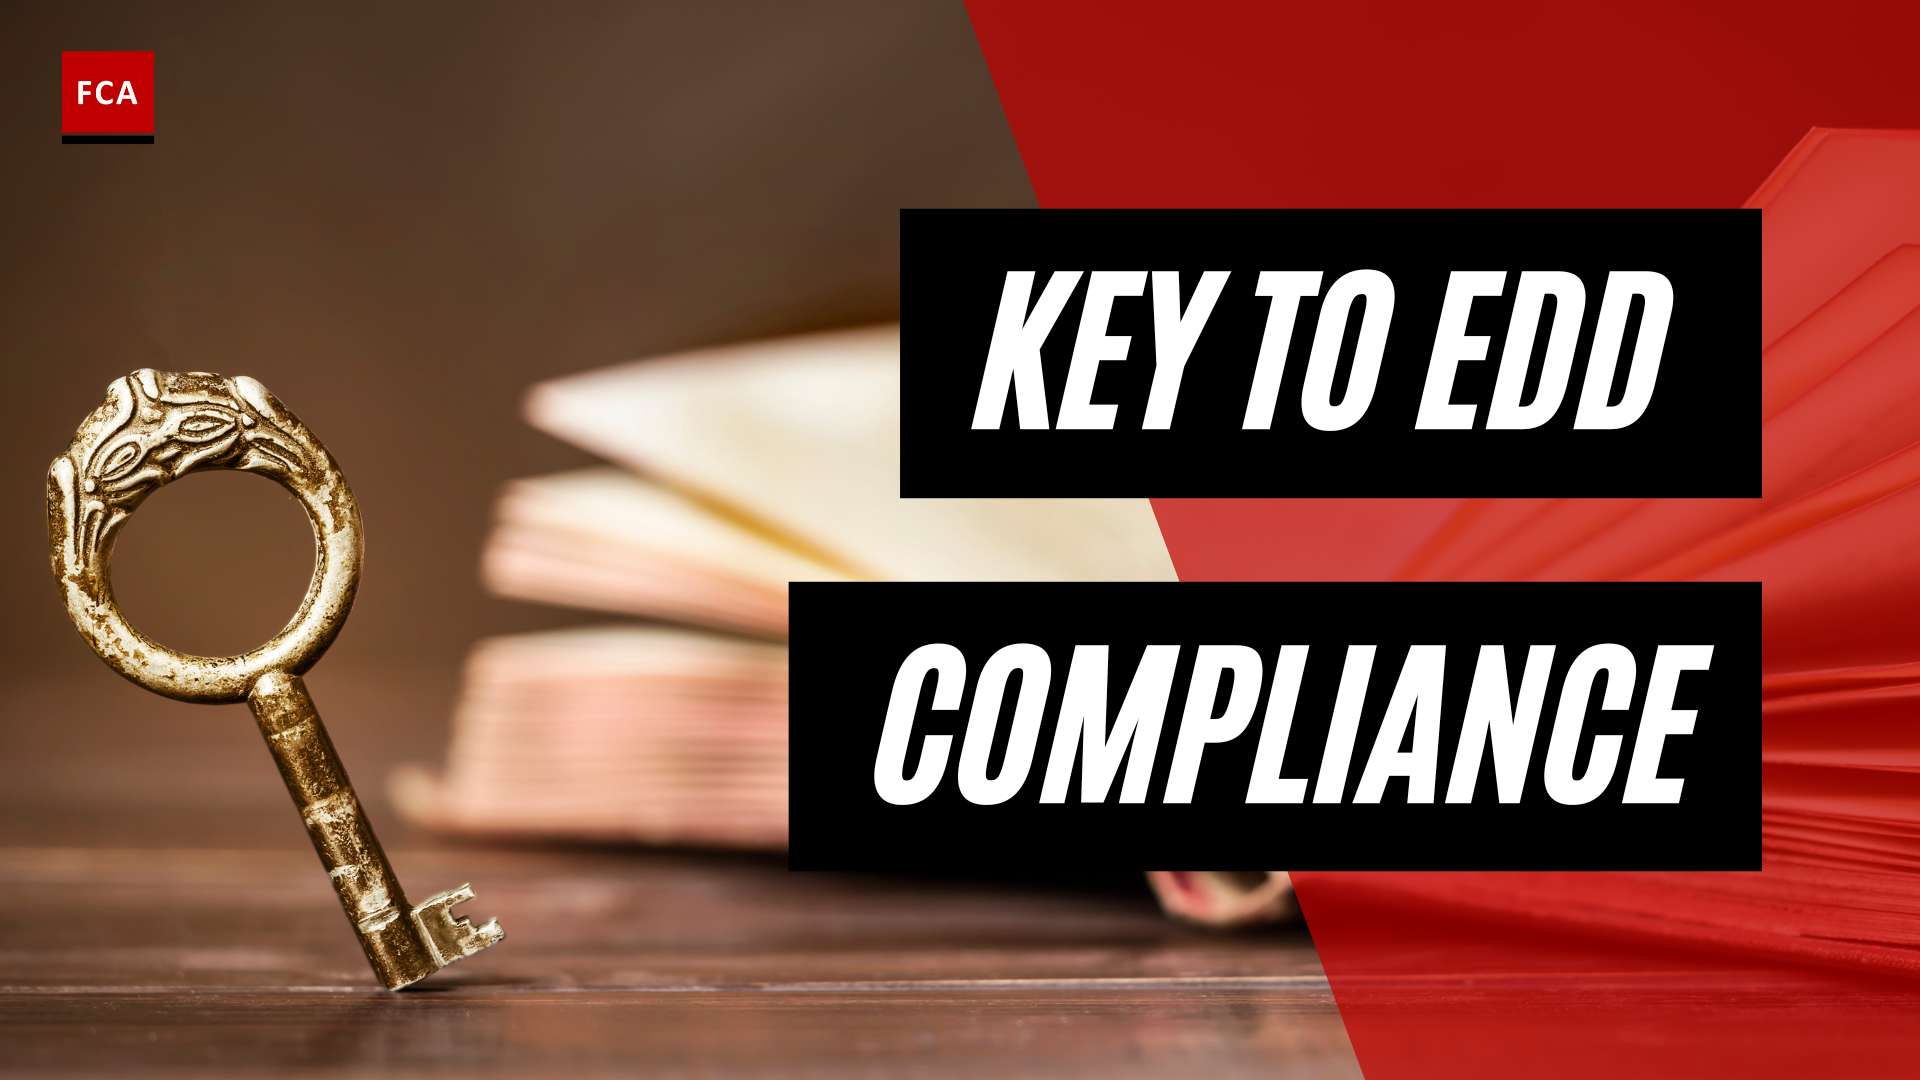 Unlocking Success: The Key To Edd Regulations And Requirements